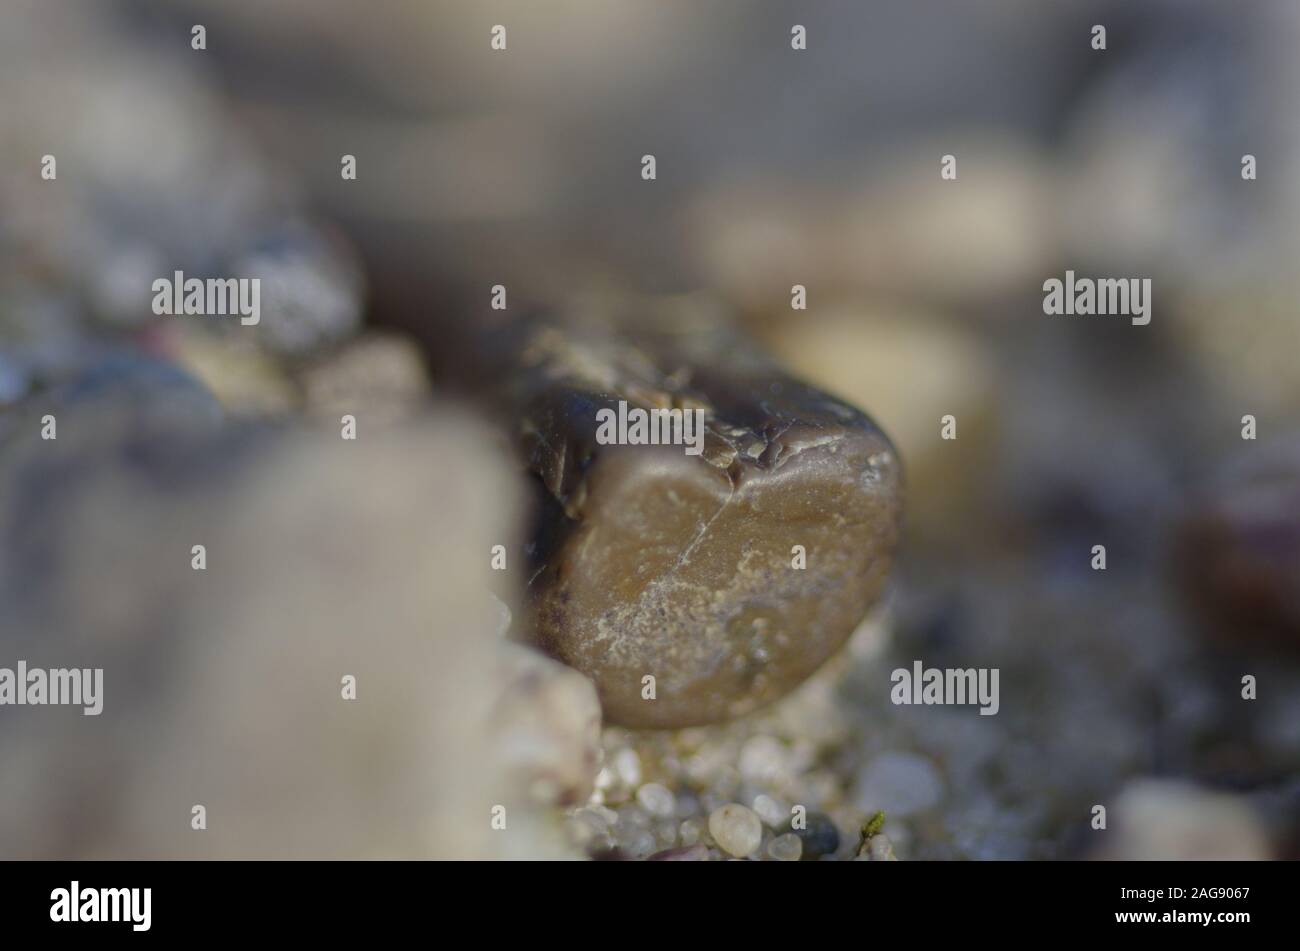 Close-up view of a small stone on sand Stock Photo